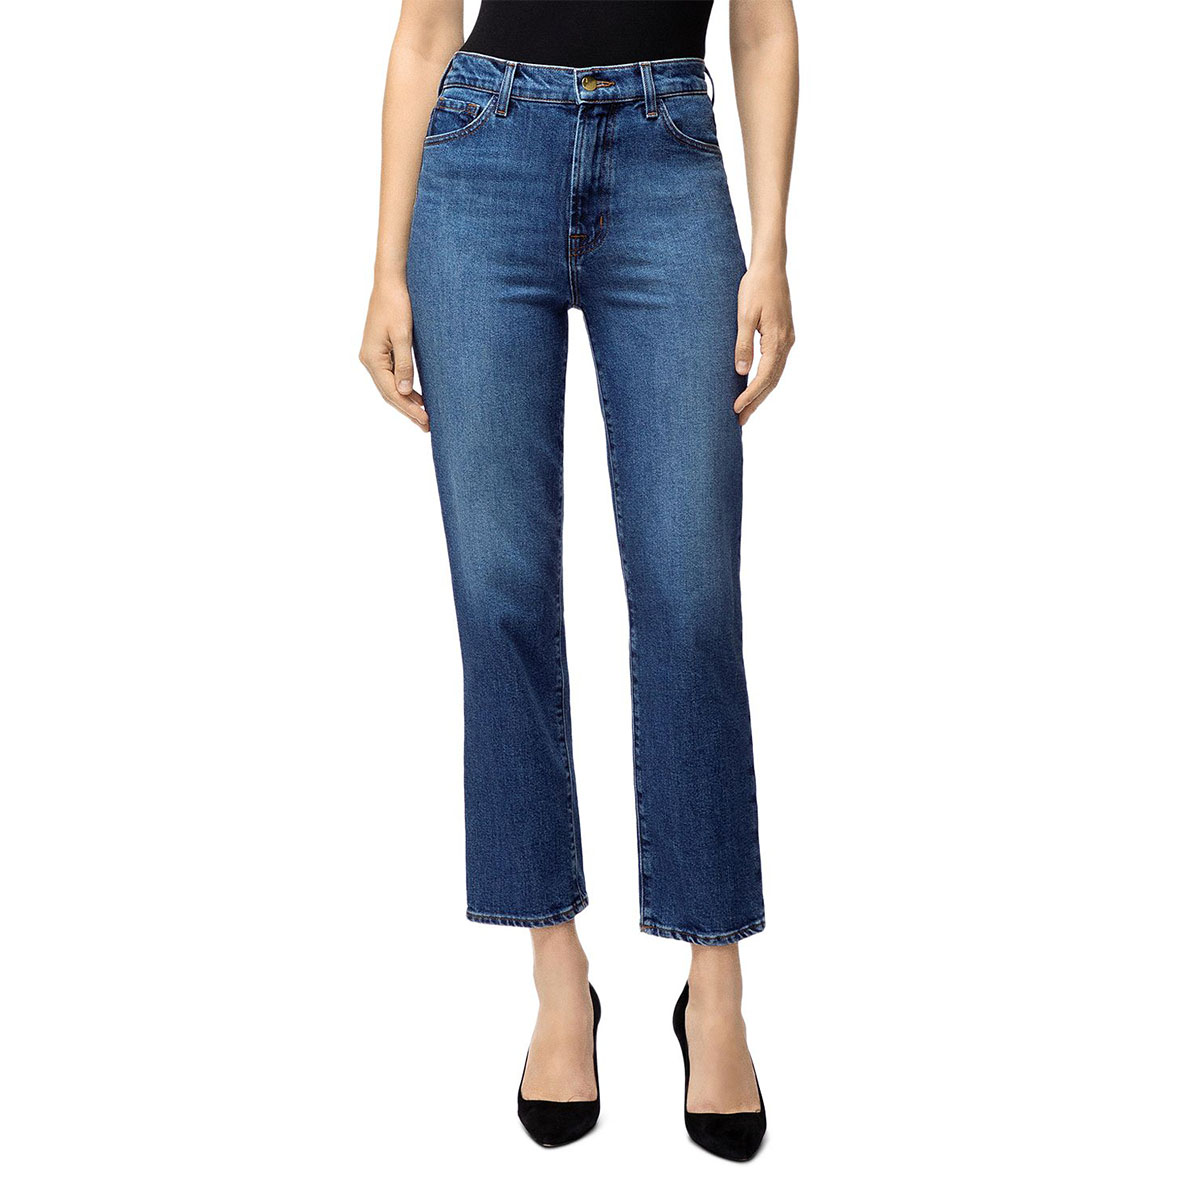 The 14 Best Pants and Jeans for Petite Women | Who What Wear